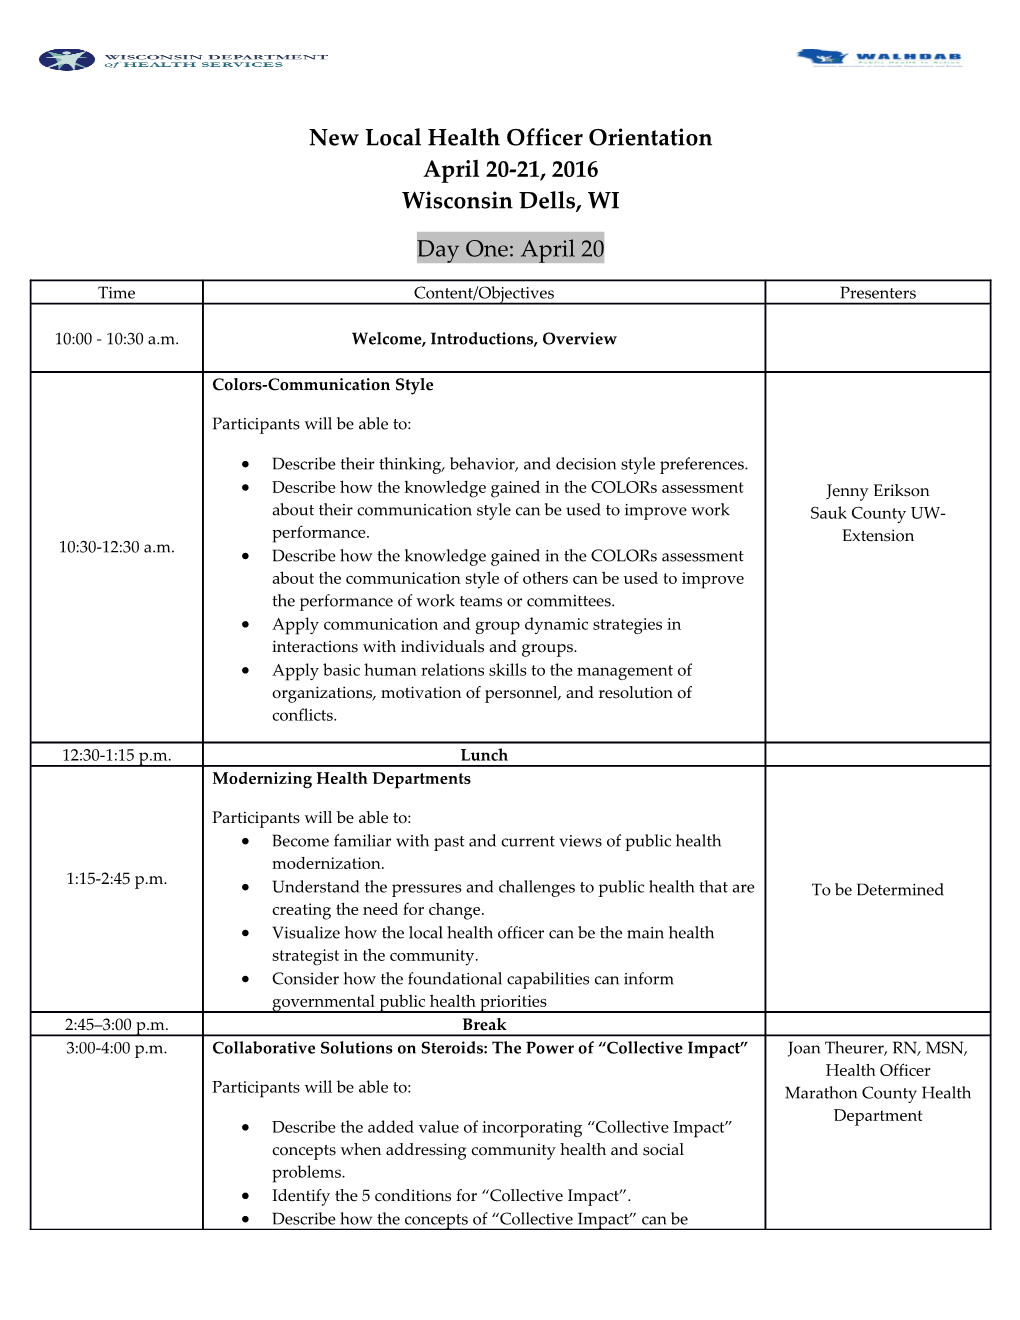 New Local Health Officer Orientation April 20-21, 2016 Wisconsin Dells, WI